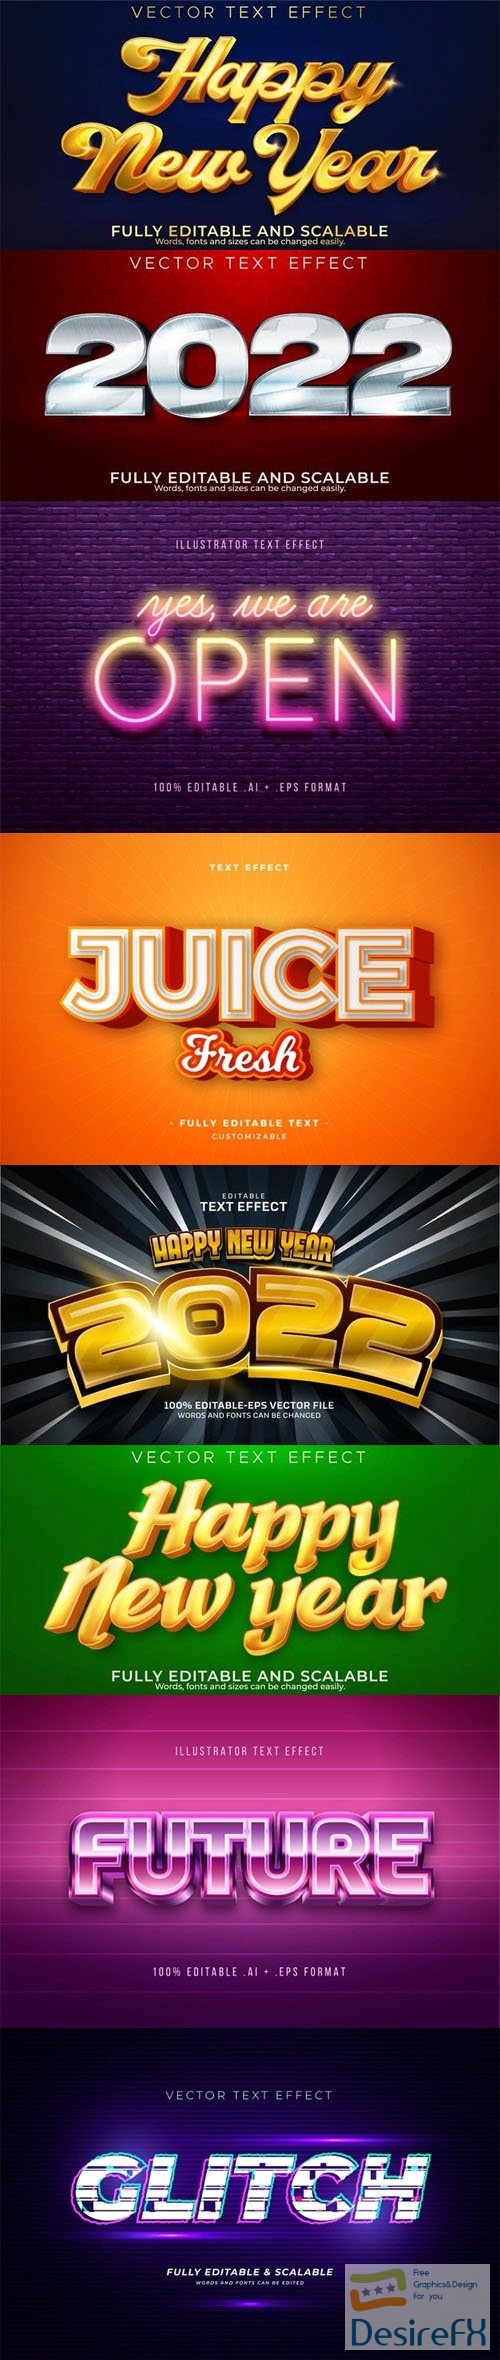 Realistic &amp; Creative Text Effects Collection Vol.2 - 10+ Vector Templates